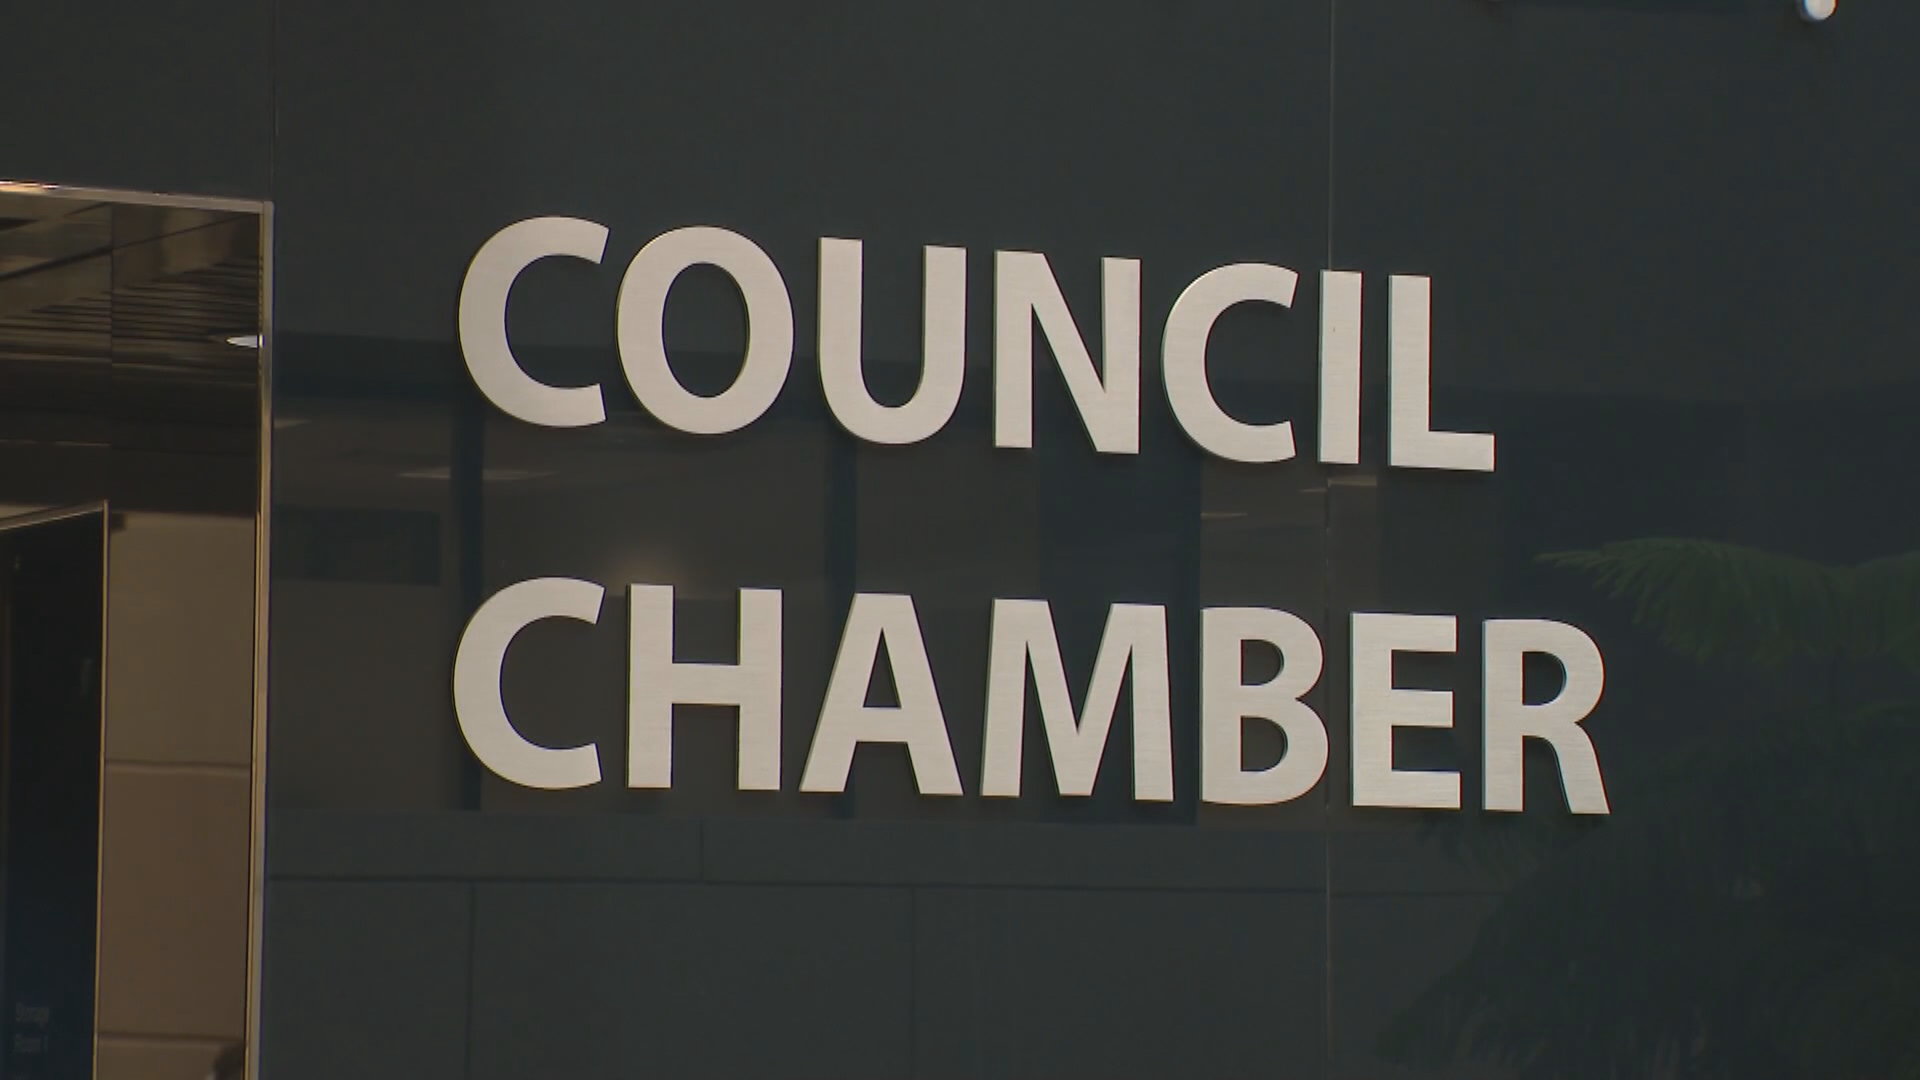 Calgary city councillors debate rules around remotely attending meetings